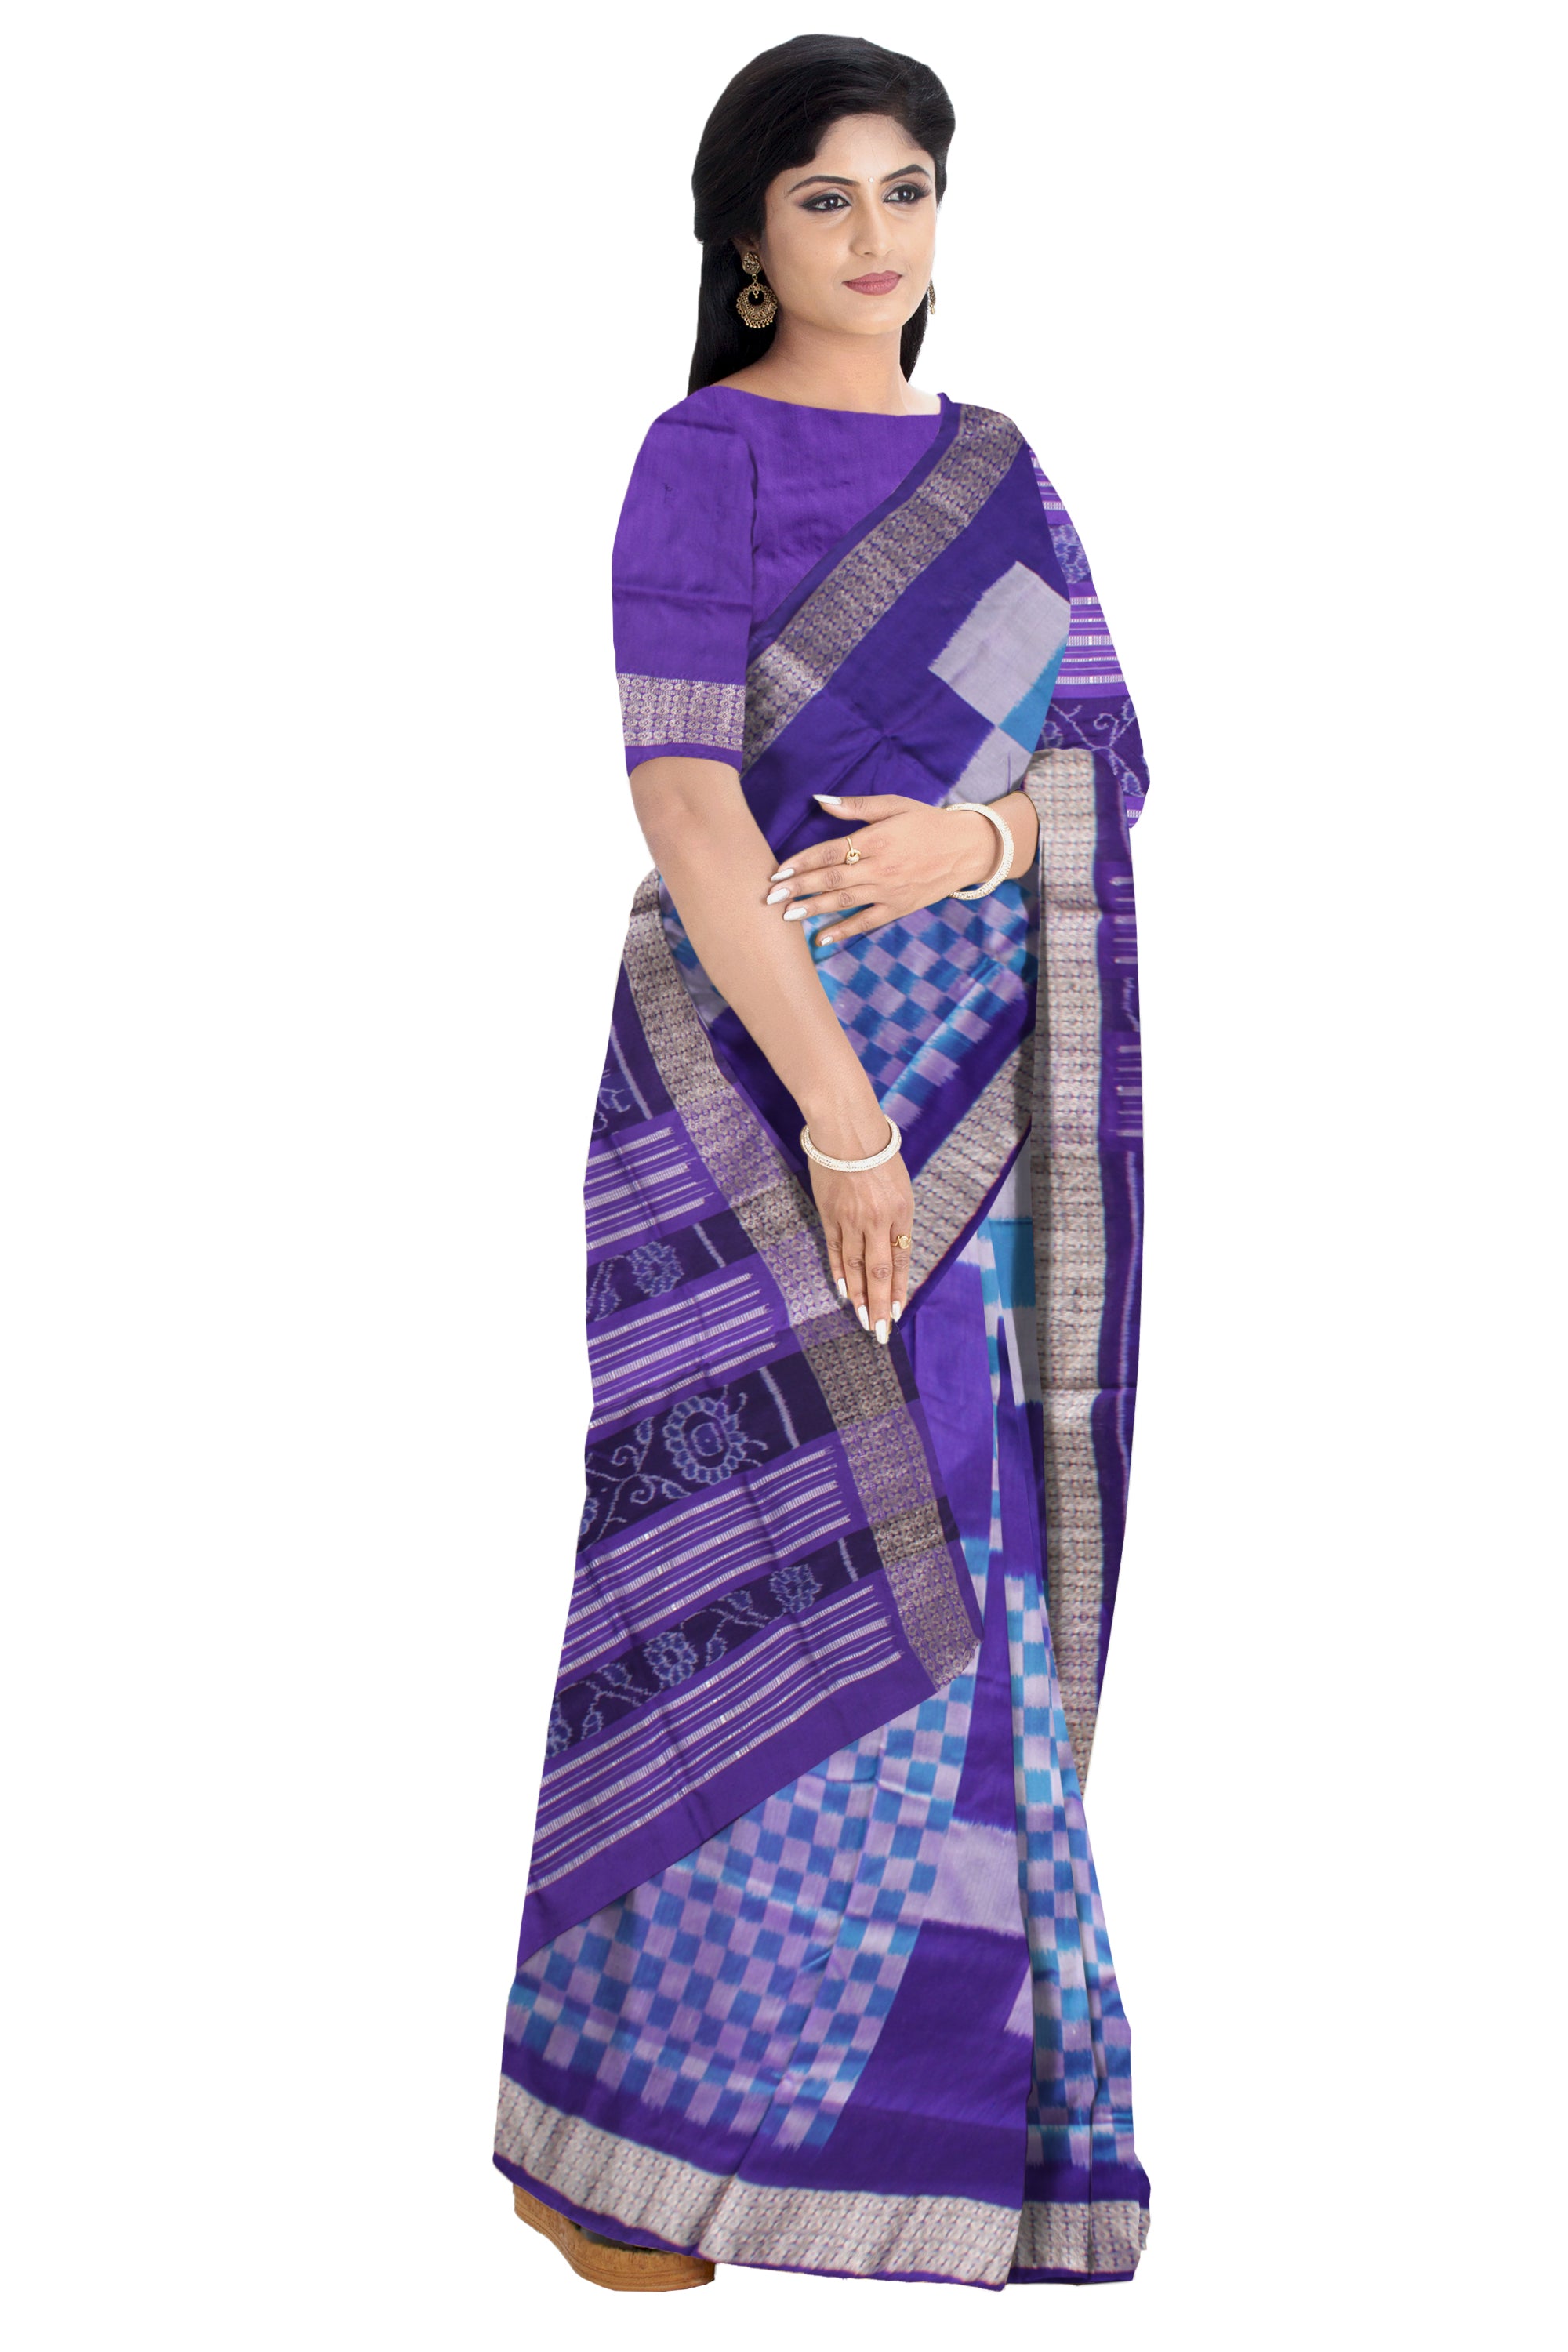 FULL BODY BIG PASAPALI PATTERN PATA SAREE IS SKY AND PURPLE COLOR BASE,COMES WITH MATCHING BLOUSE PIECE. - Koshali Arts & Crafts Enterprise